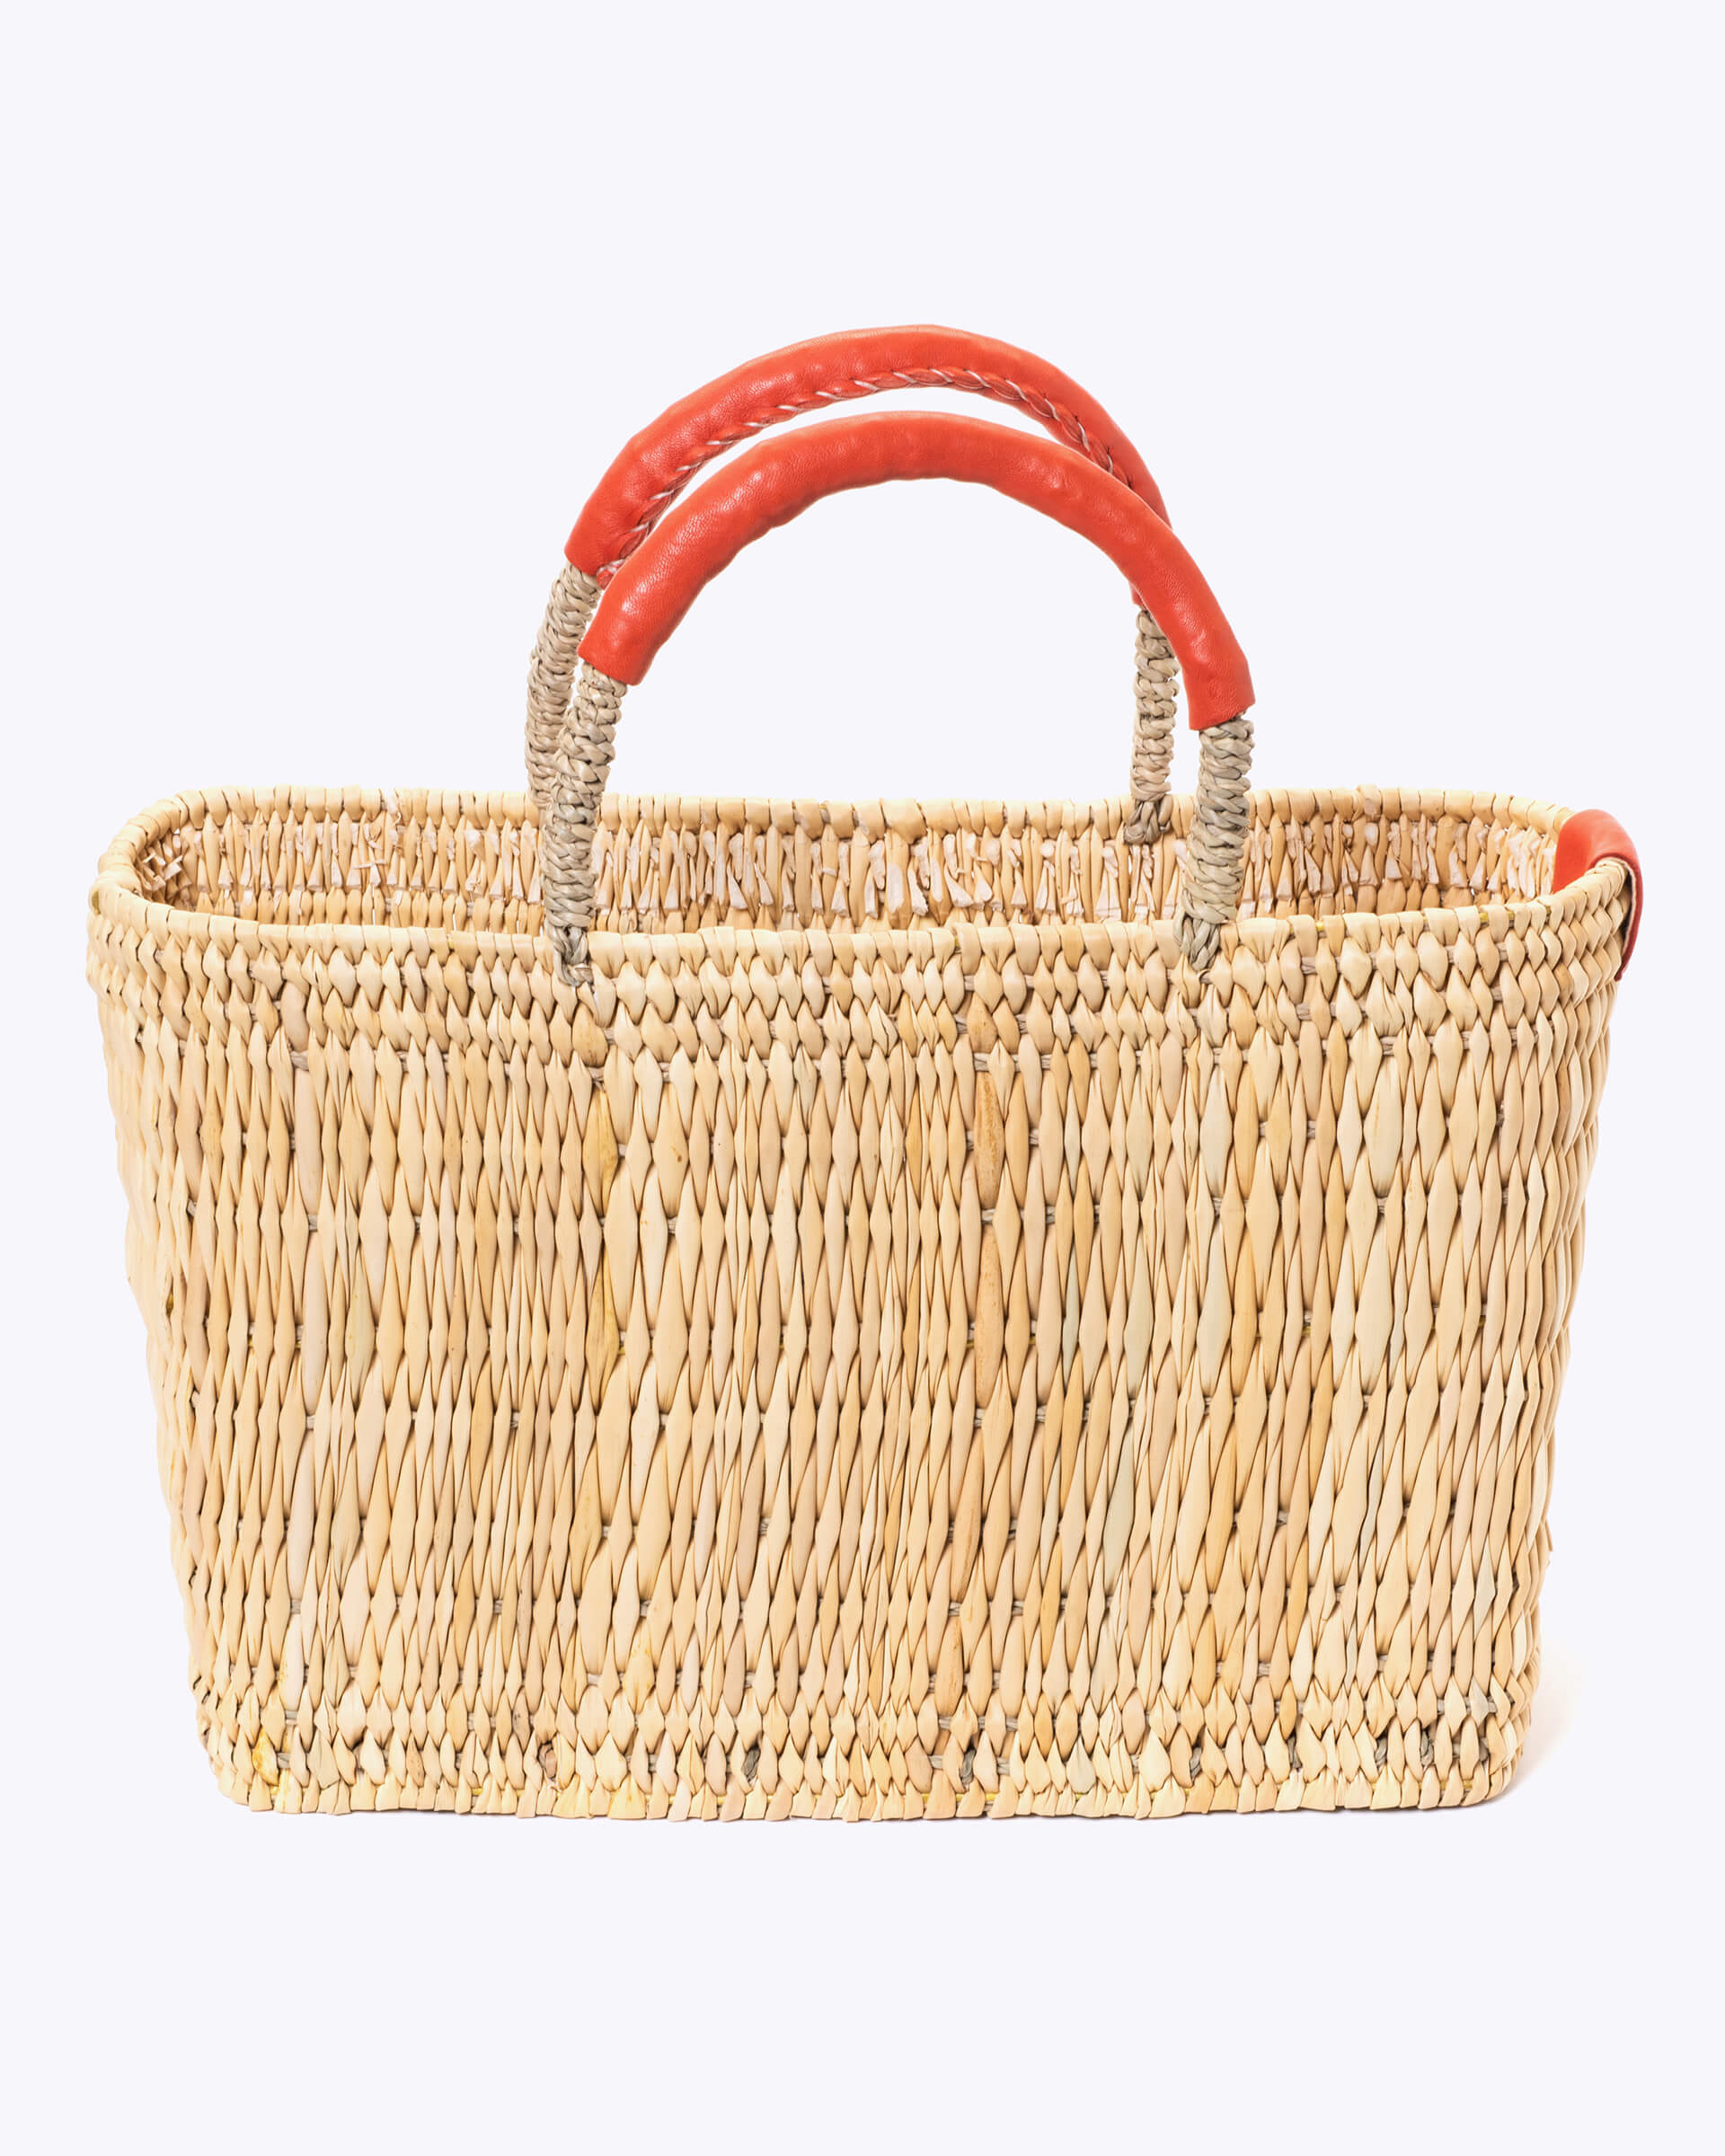 small straw basket wrapped with orange leather handle on a white background 